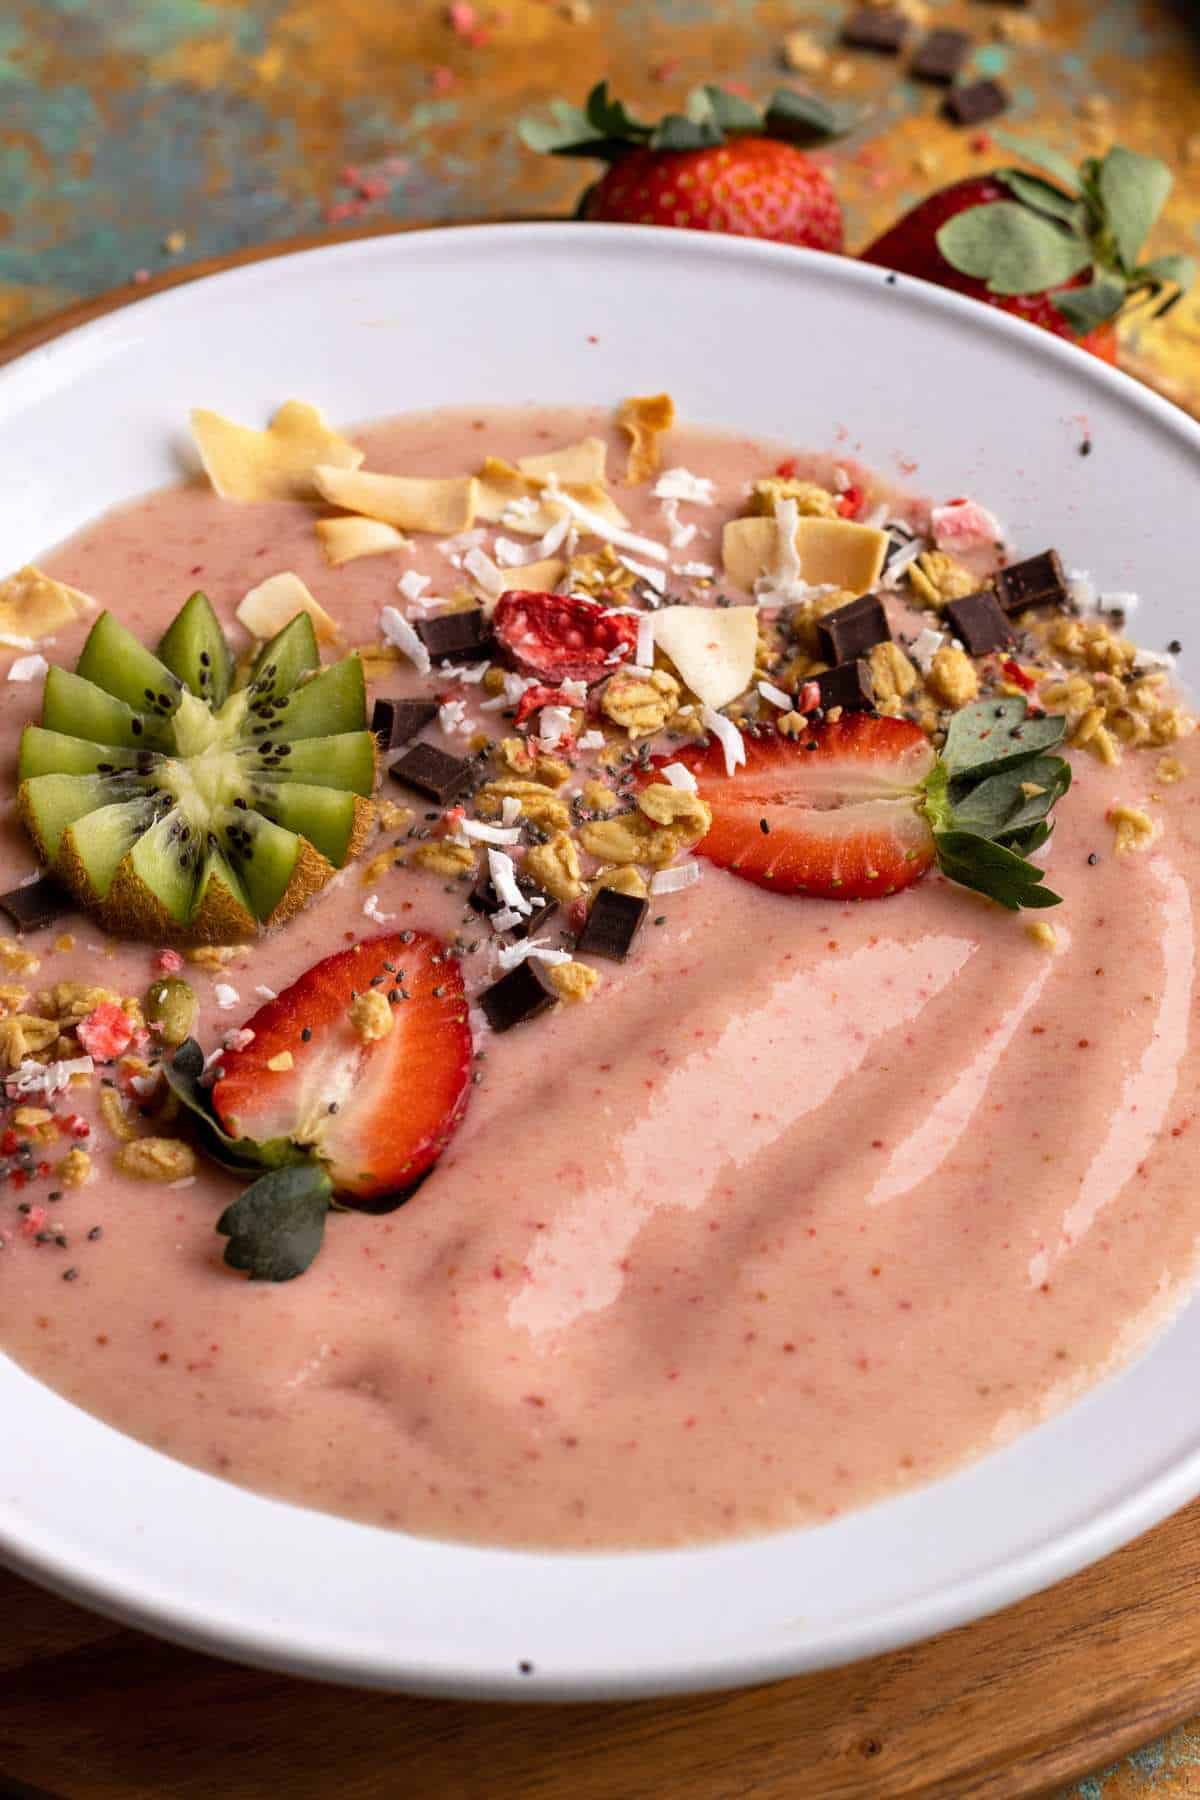 Strawberry smoothie bowl with granola and toasted coconut.